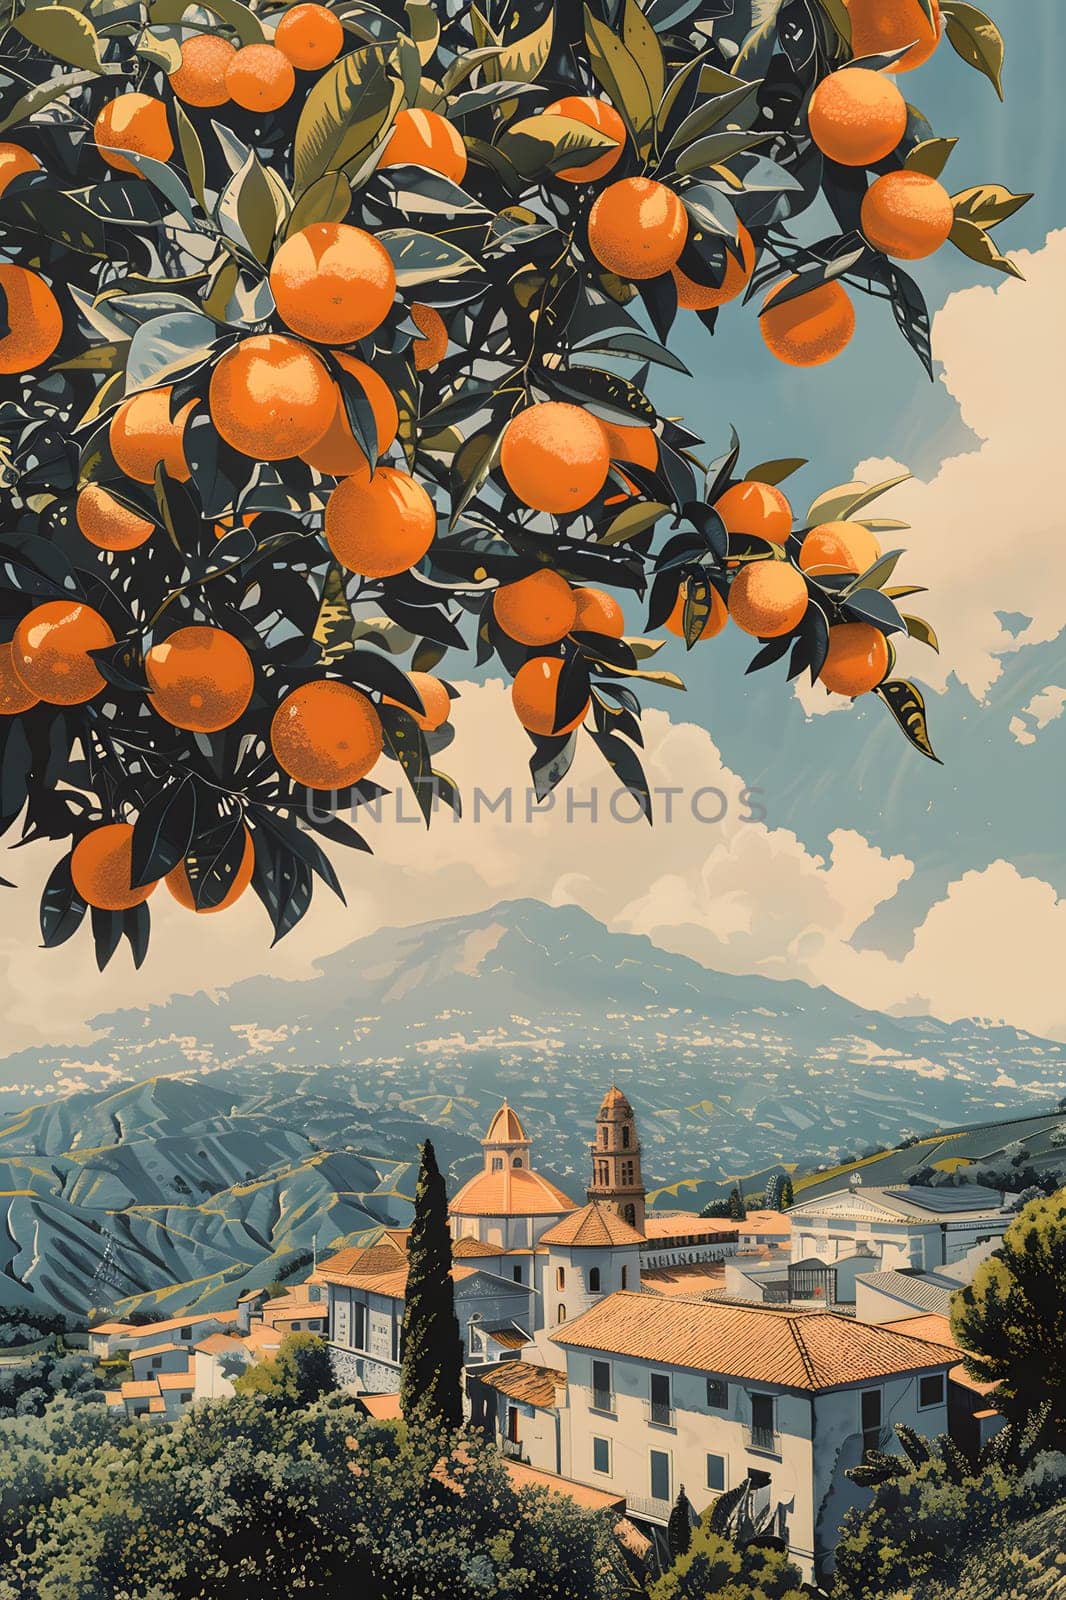 Artistic depiction of Valencia oranges on a tree with a village backdrop by Nadtochiy